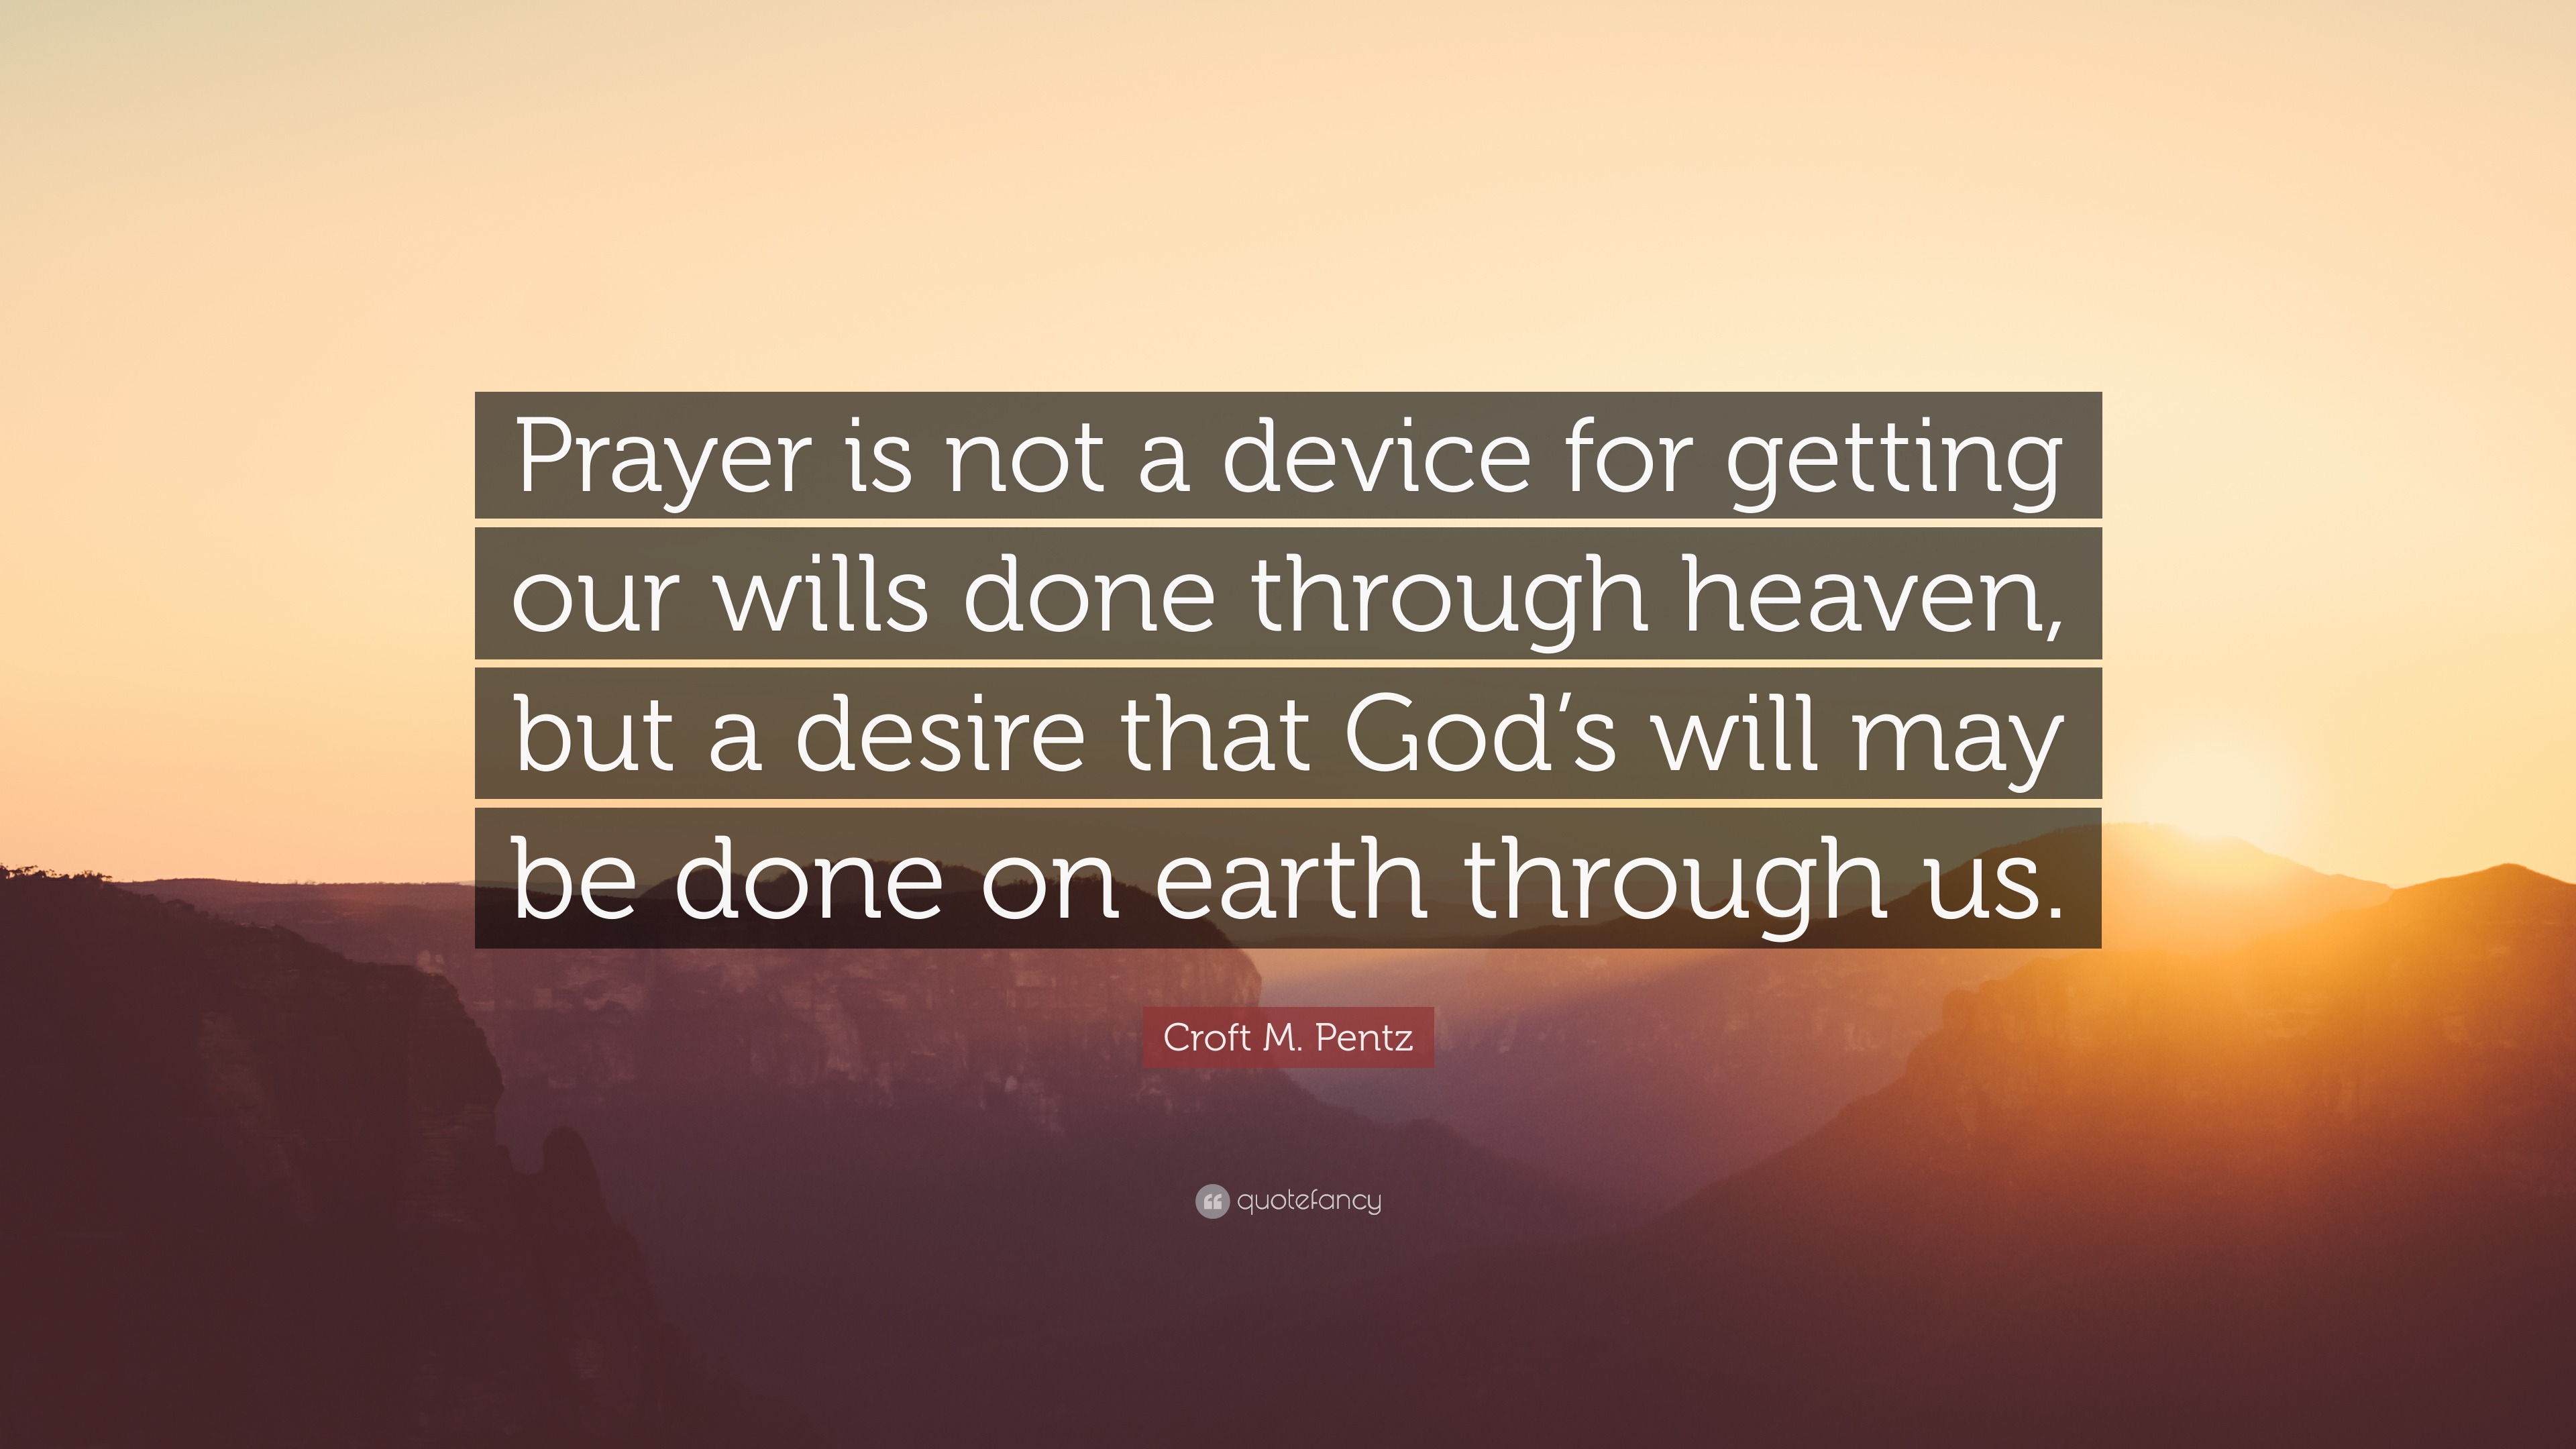 Croft M. Pentz Quote: “Prayer is not a device for getting our wills ...